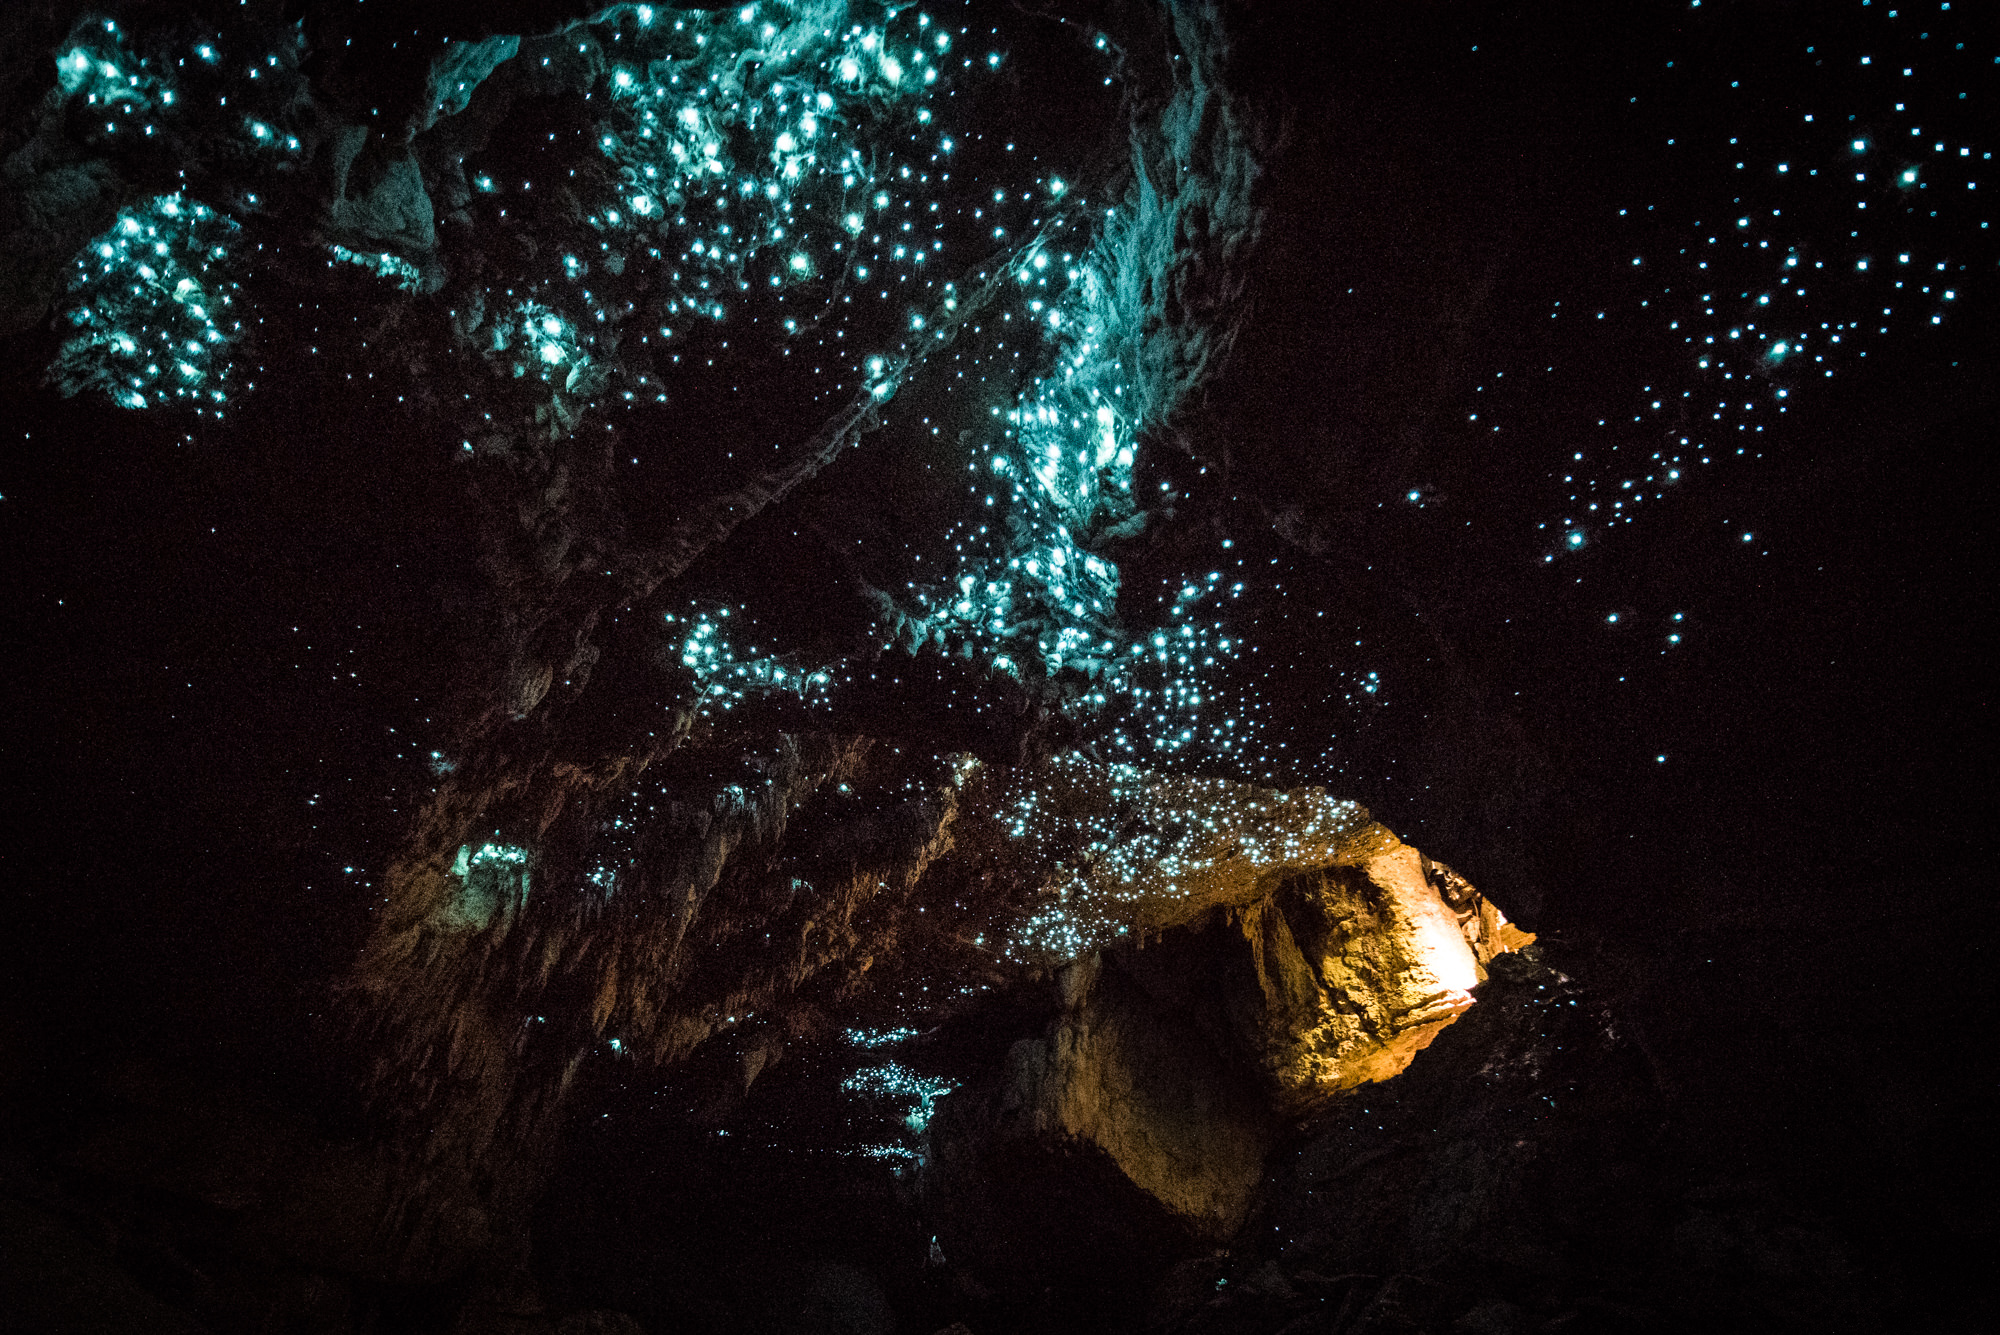 who discovered the waitomo glowworm caves in new zealand